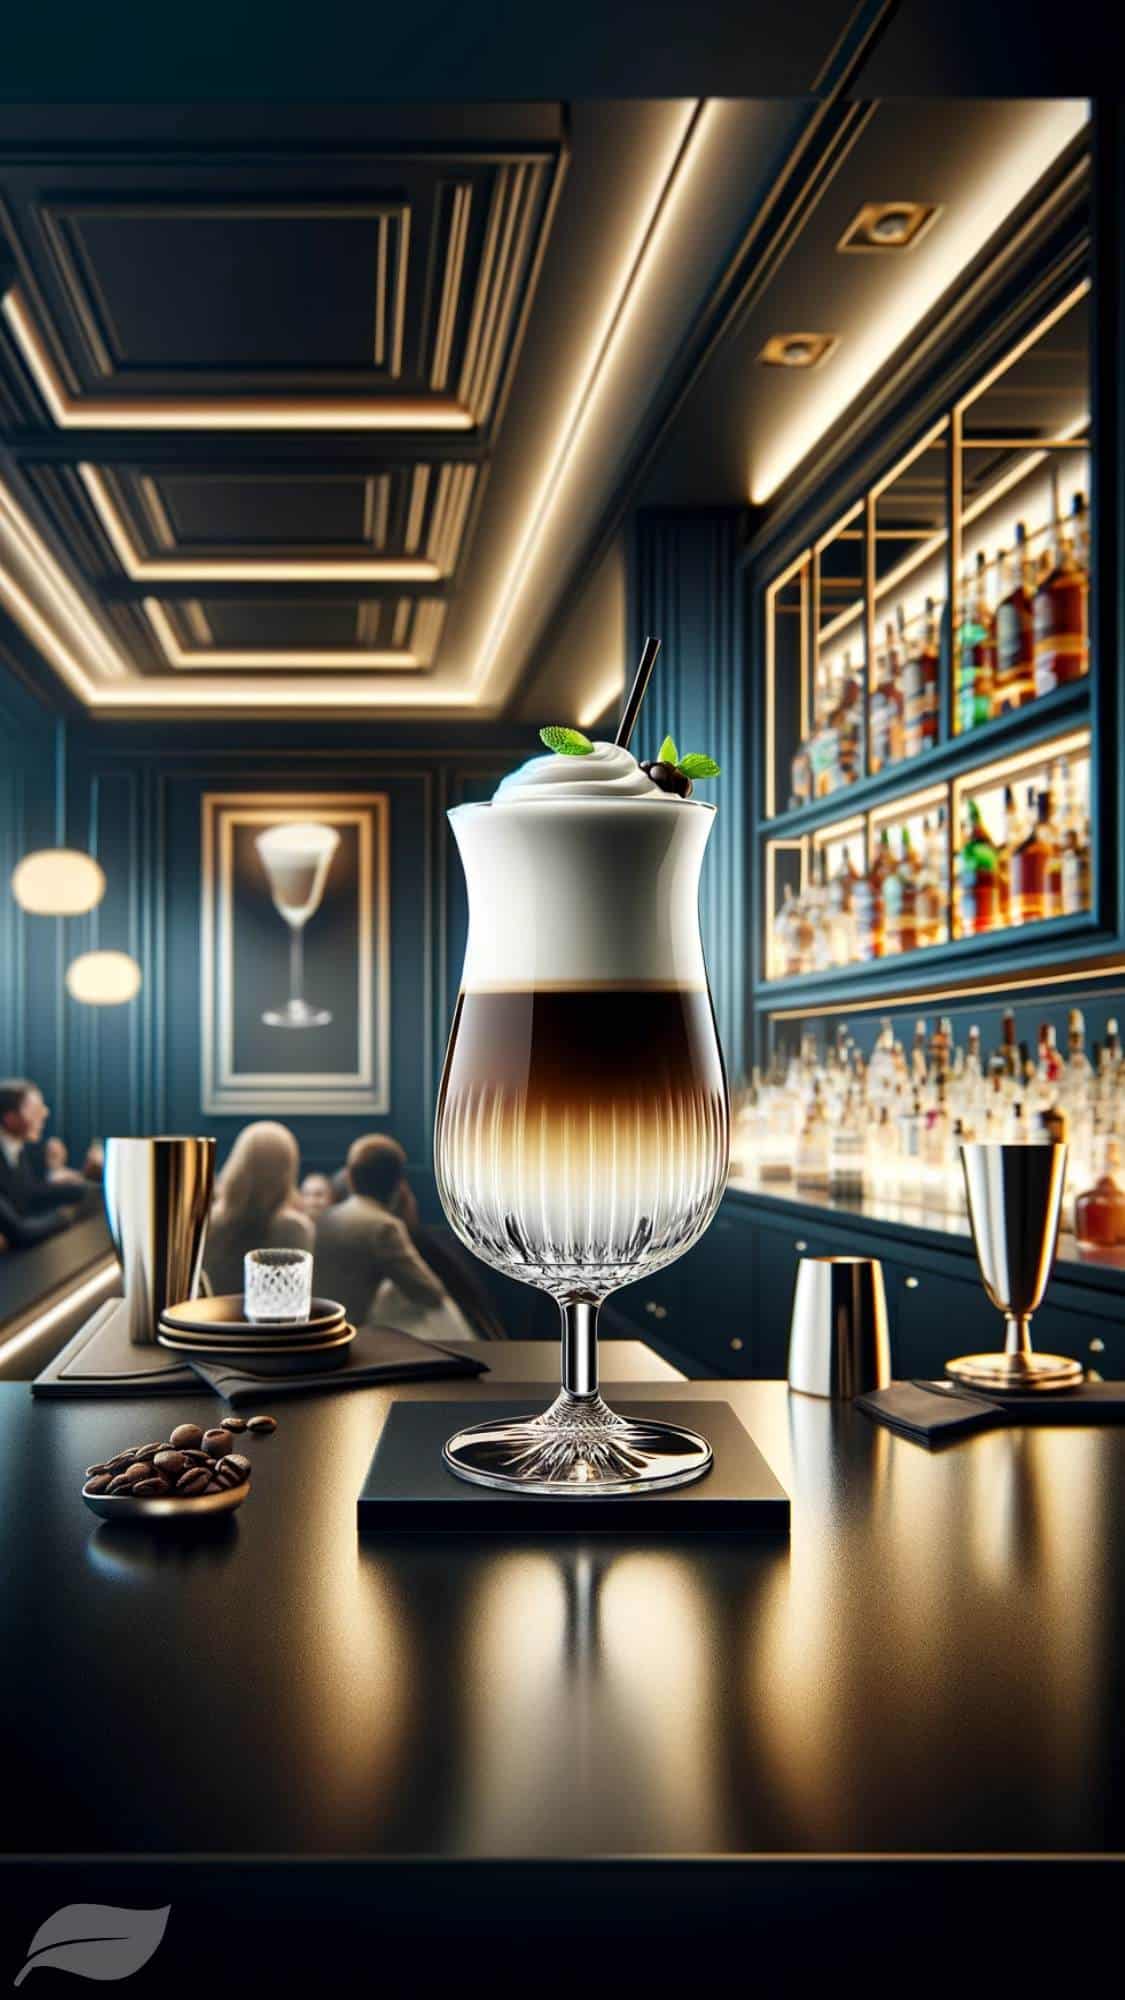 A luxurious and sophisticated vertical image showcasing a White Russian cocktail, elegantly displayed in a high-quality glass